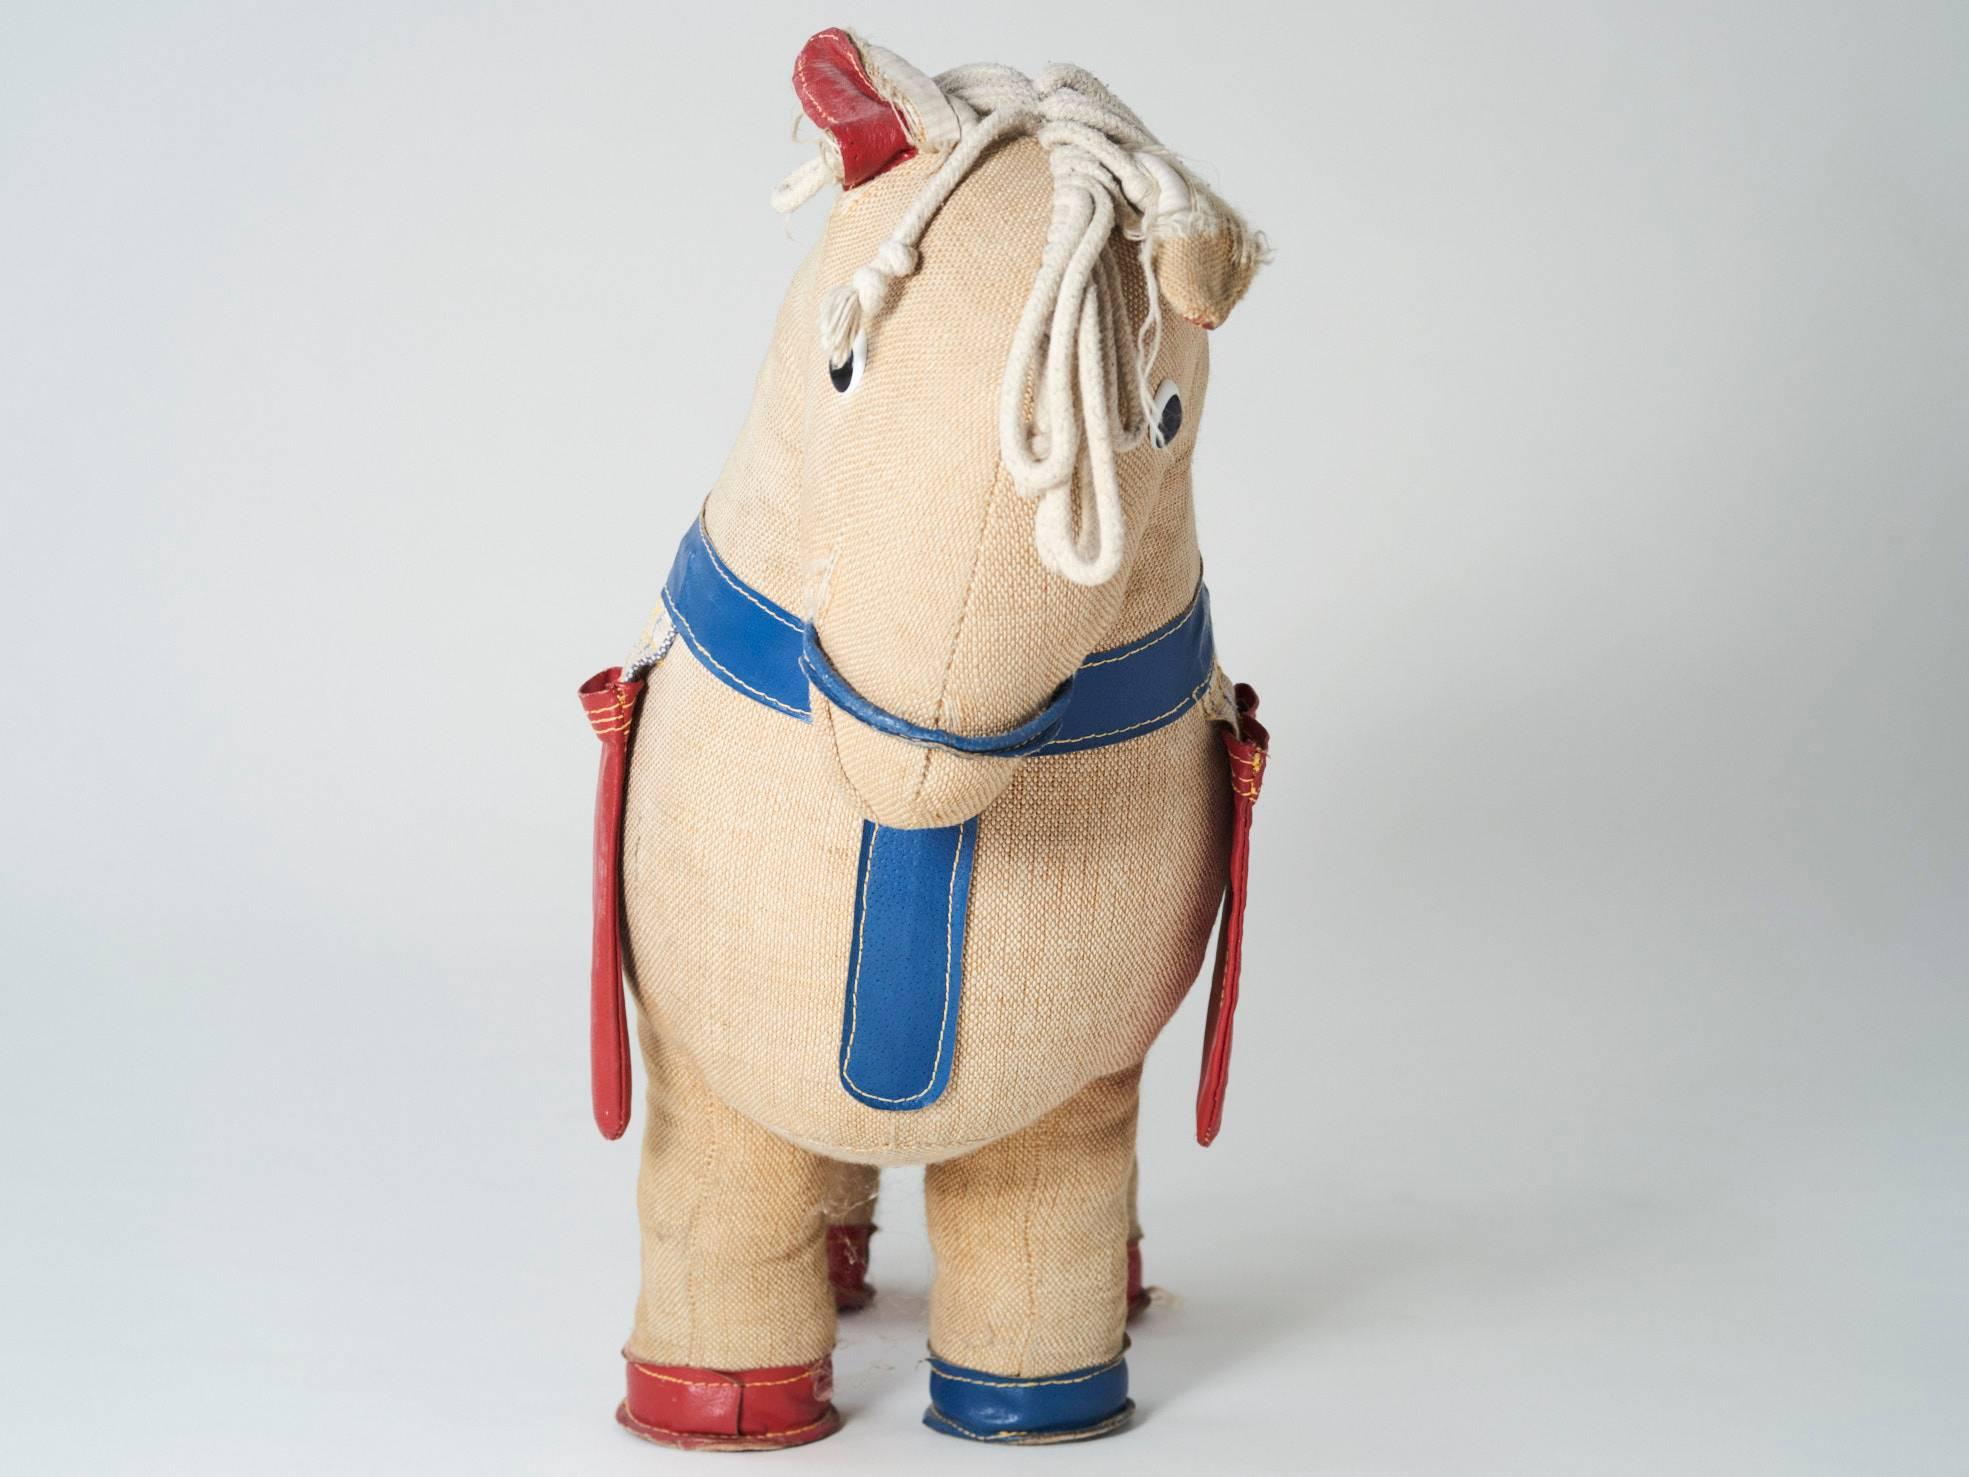 German Horse by Renate Müller Therapeutic Toy